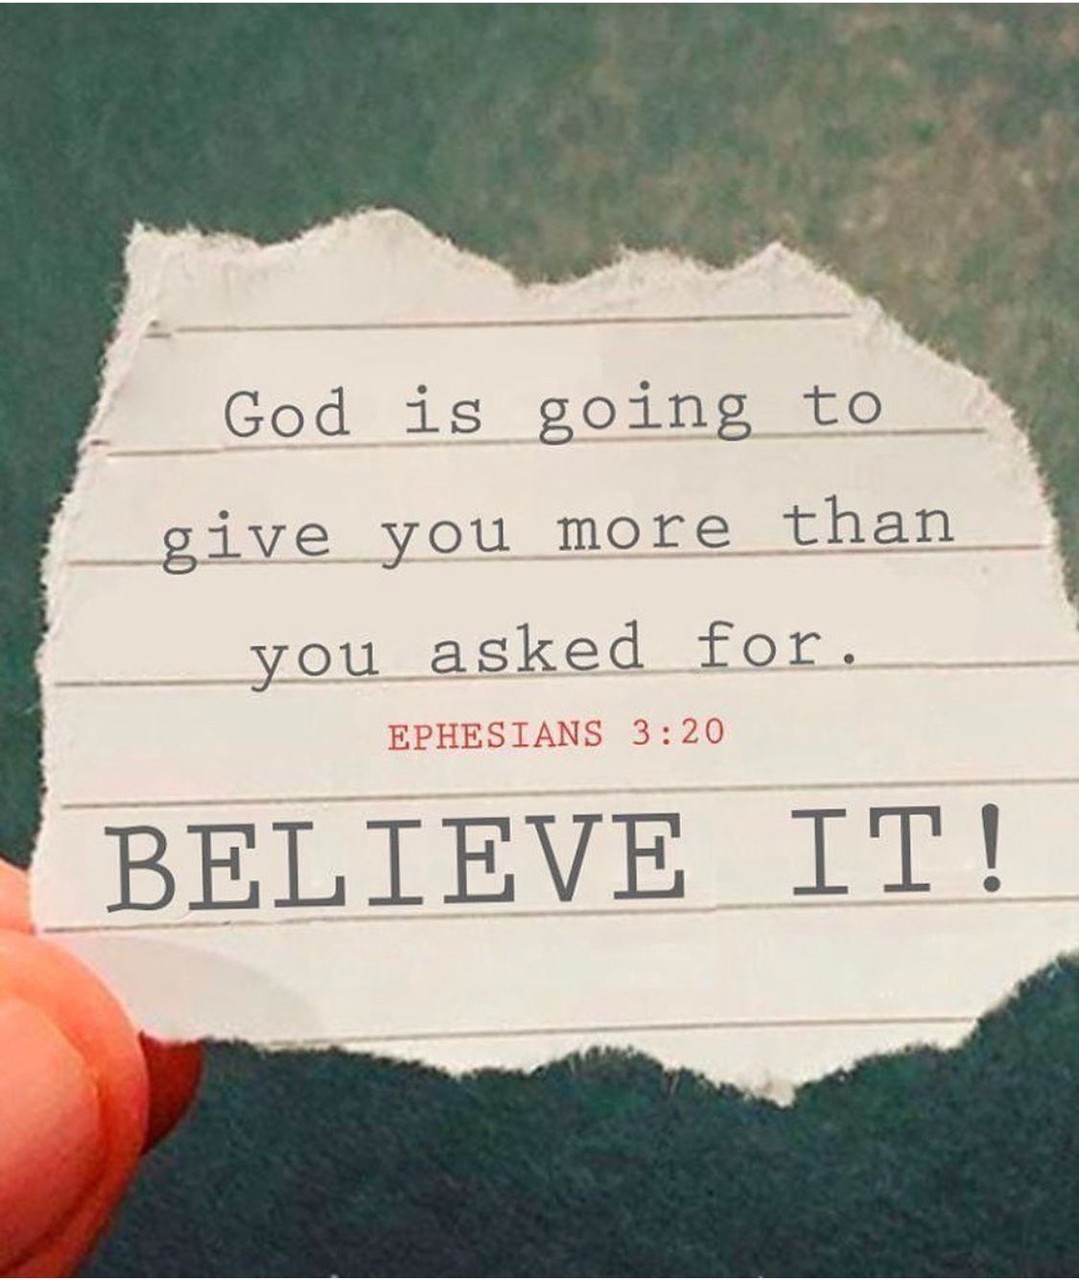 God is going to give you more than you asked for. Believe it!